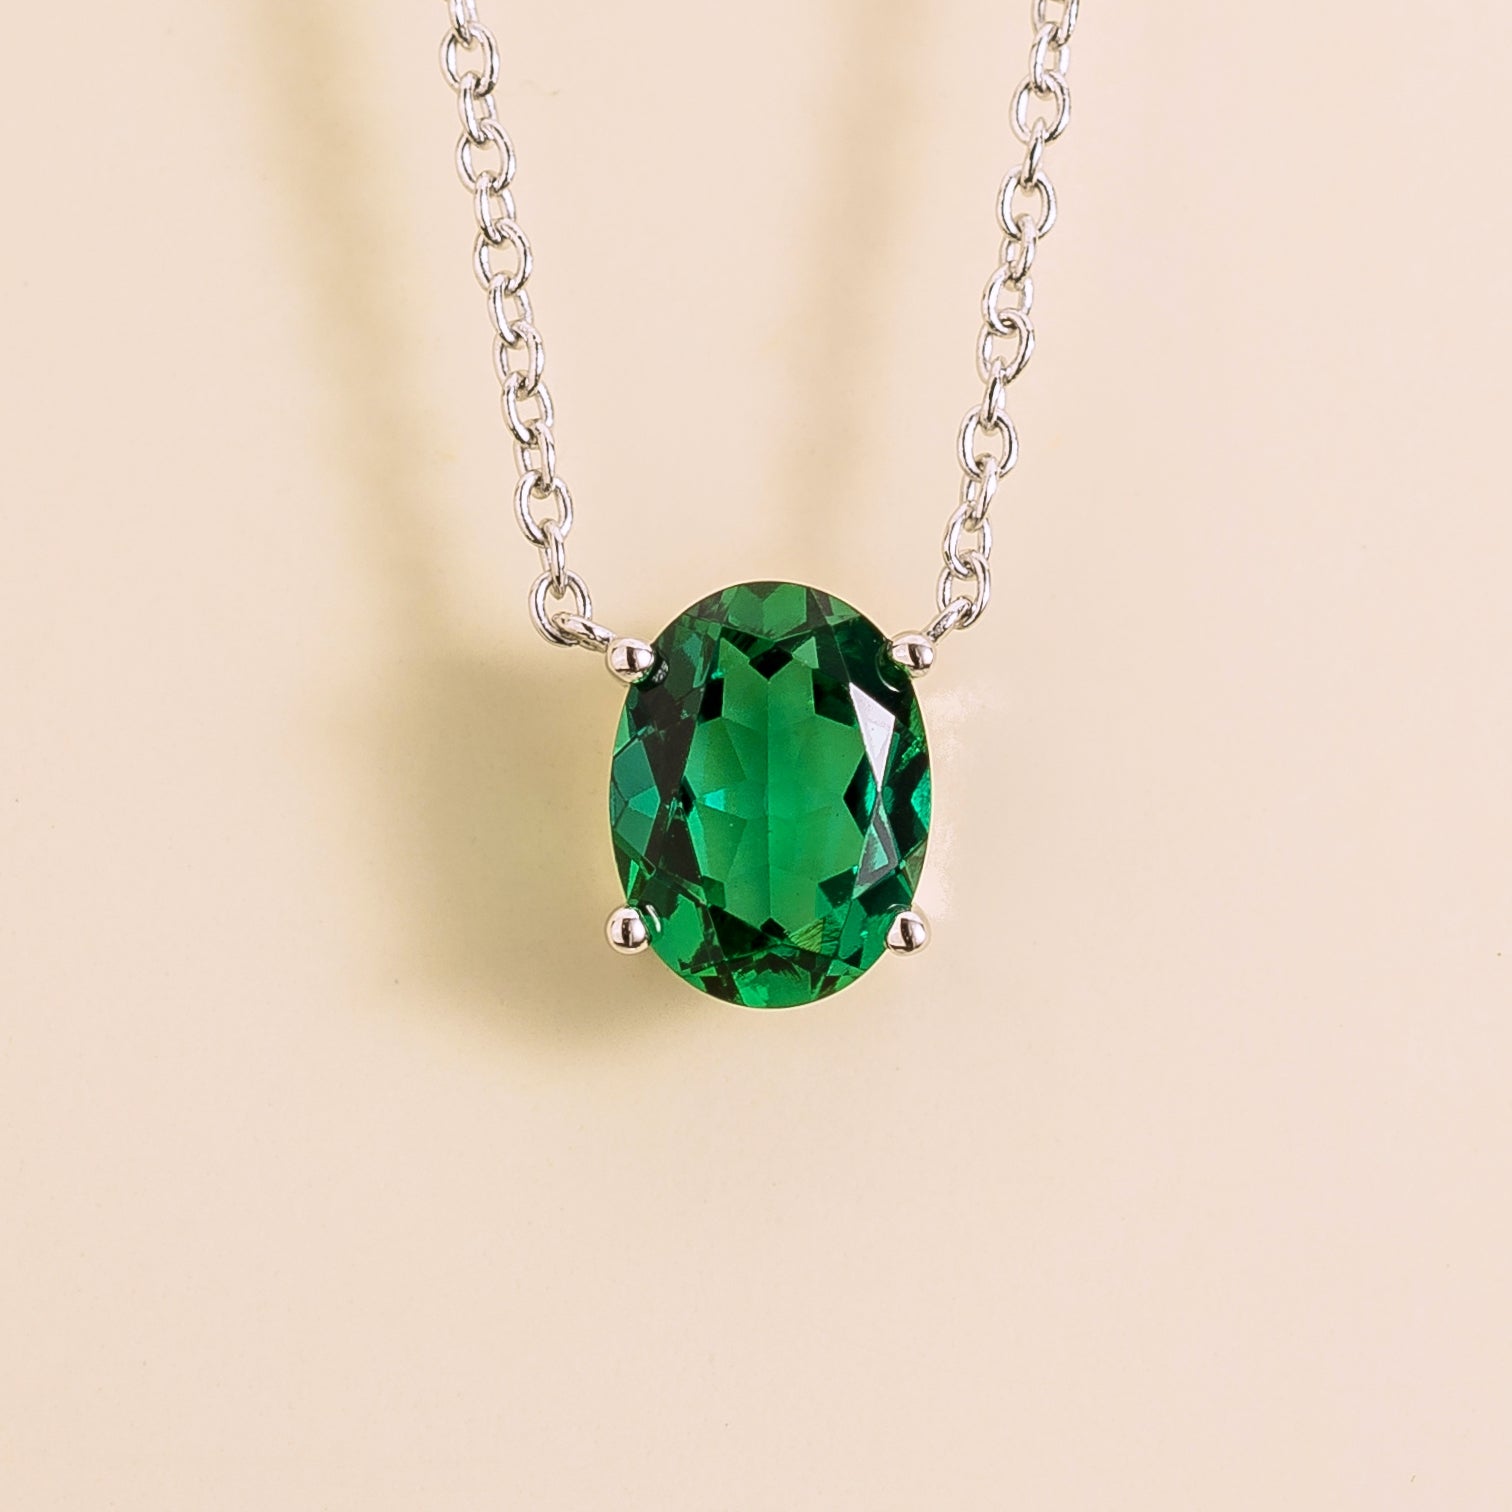 Emerald Earrings Juvetti Jewellery London Thamani White Gold Pendant Necklace In Emerald